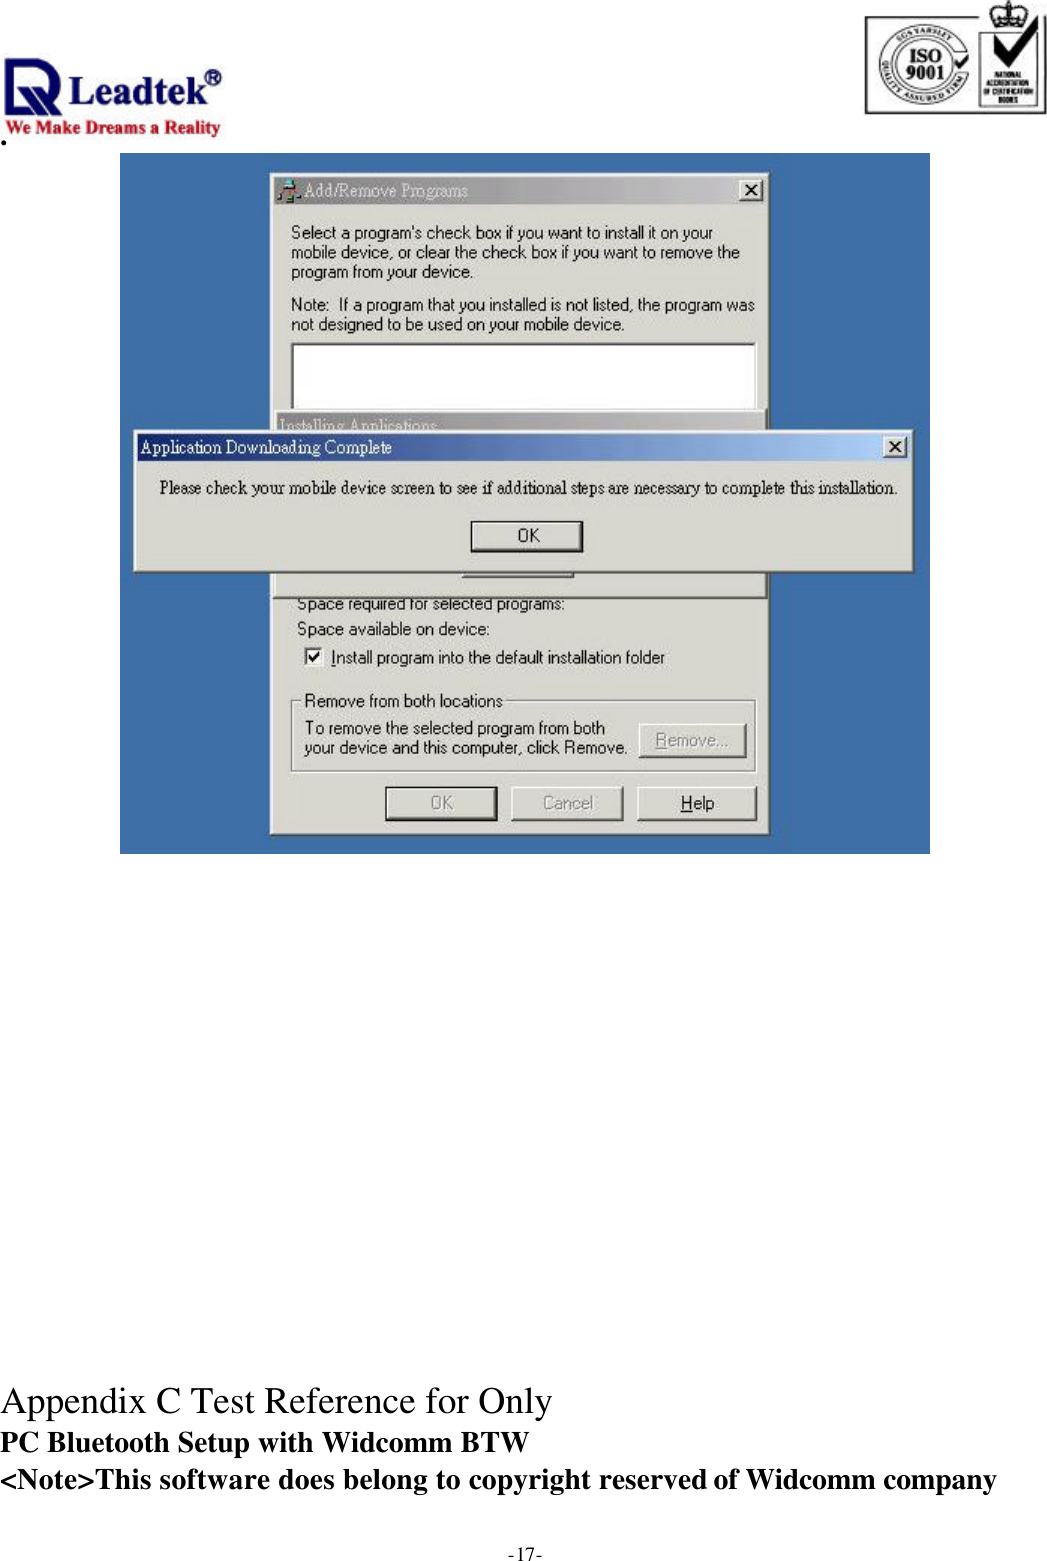                                                                              . -  - 17               Appendix C Test Reference for Only PC Bluetooth Setup with Widcomm BTW &lt;Note&gt;This software does belong to copyright reserved of Widcomm company 